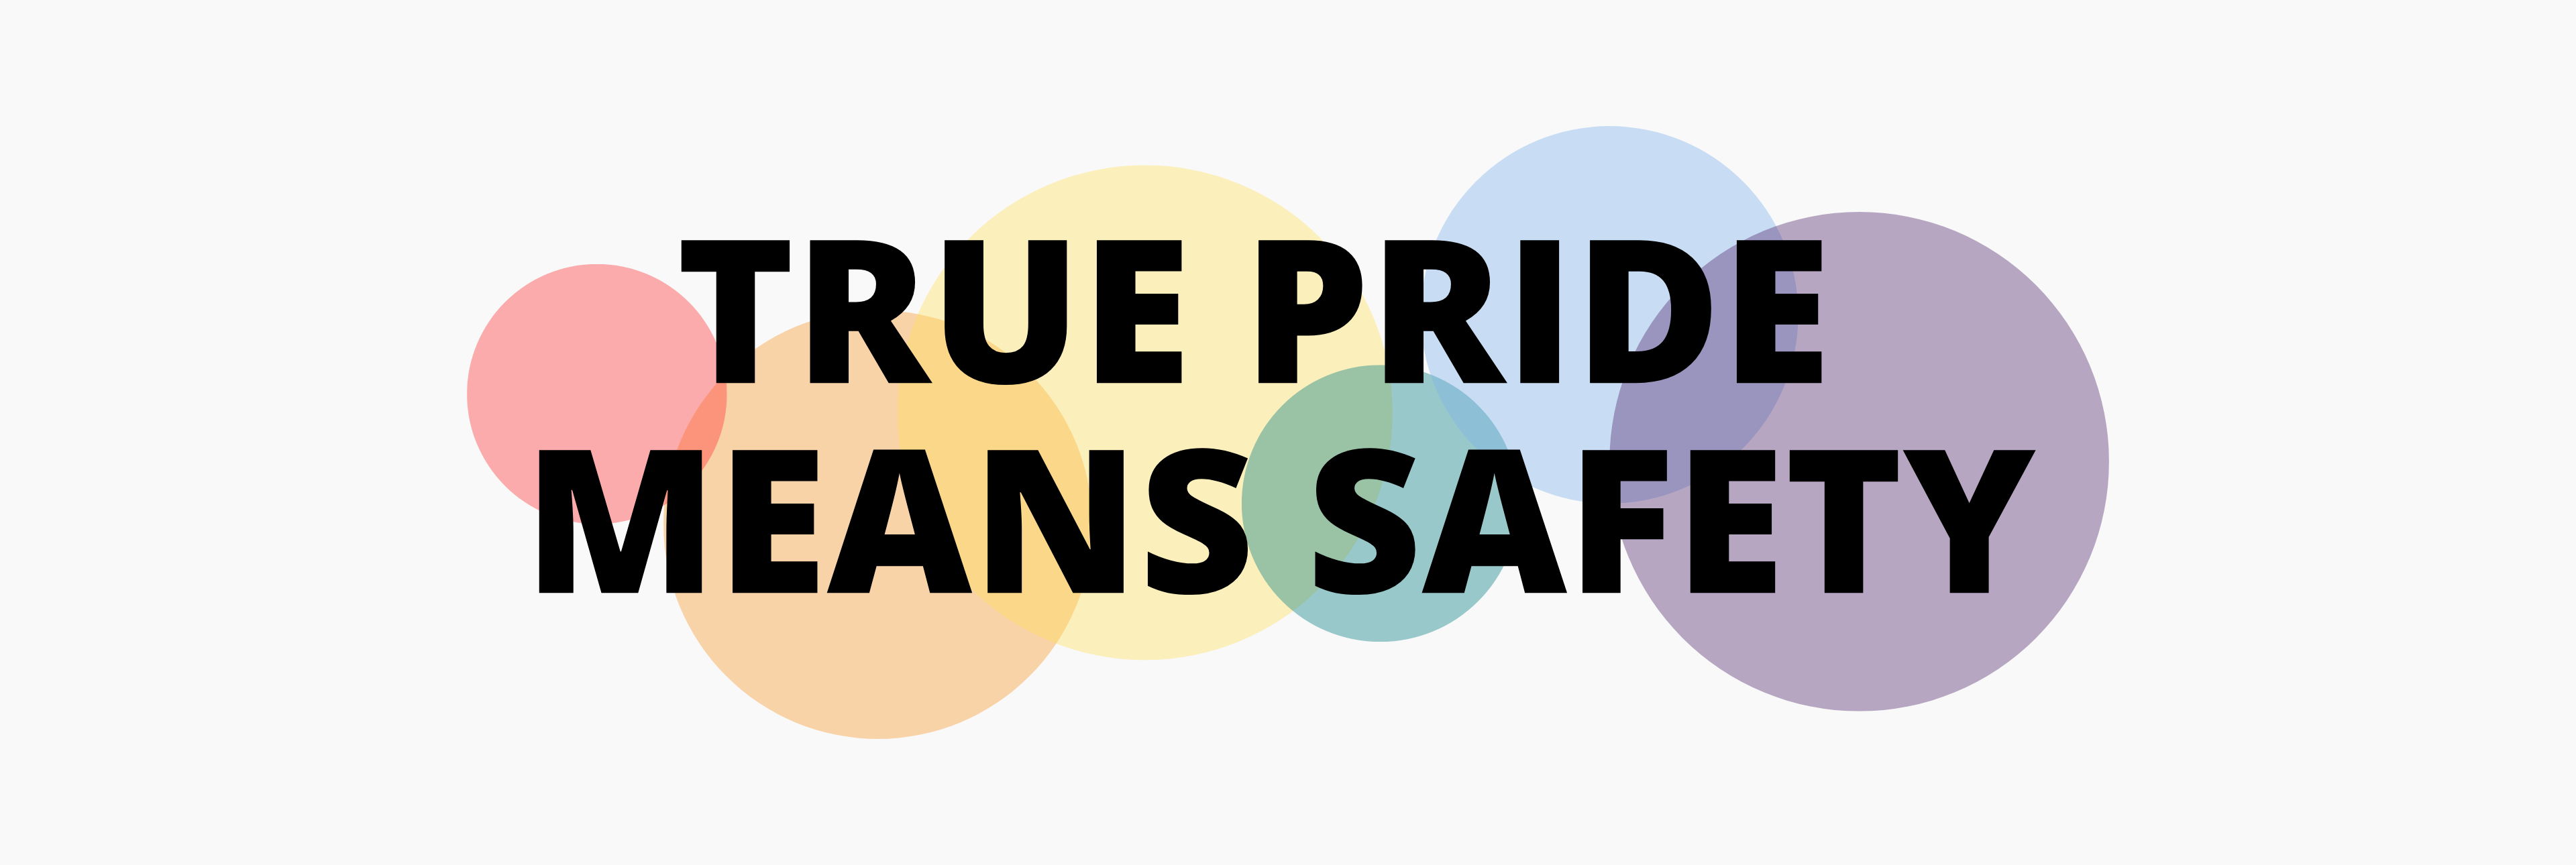 Text reads "True Pride Means Safety"